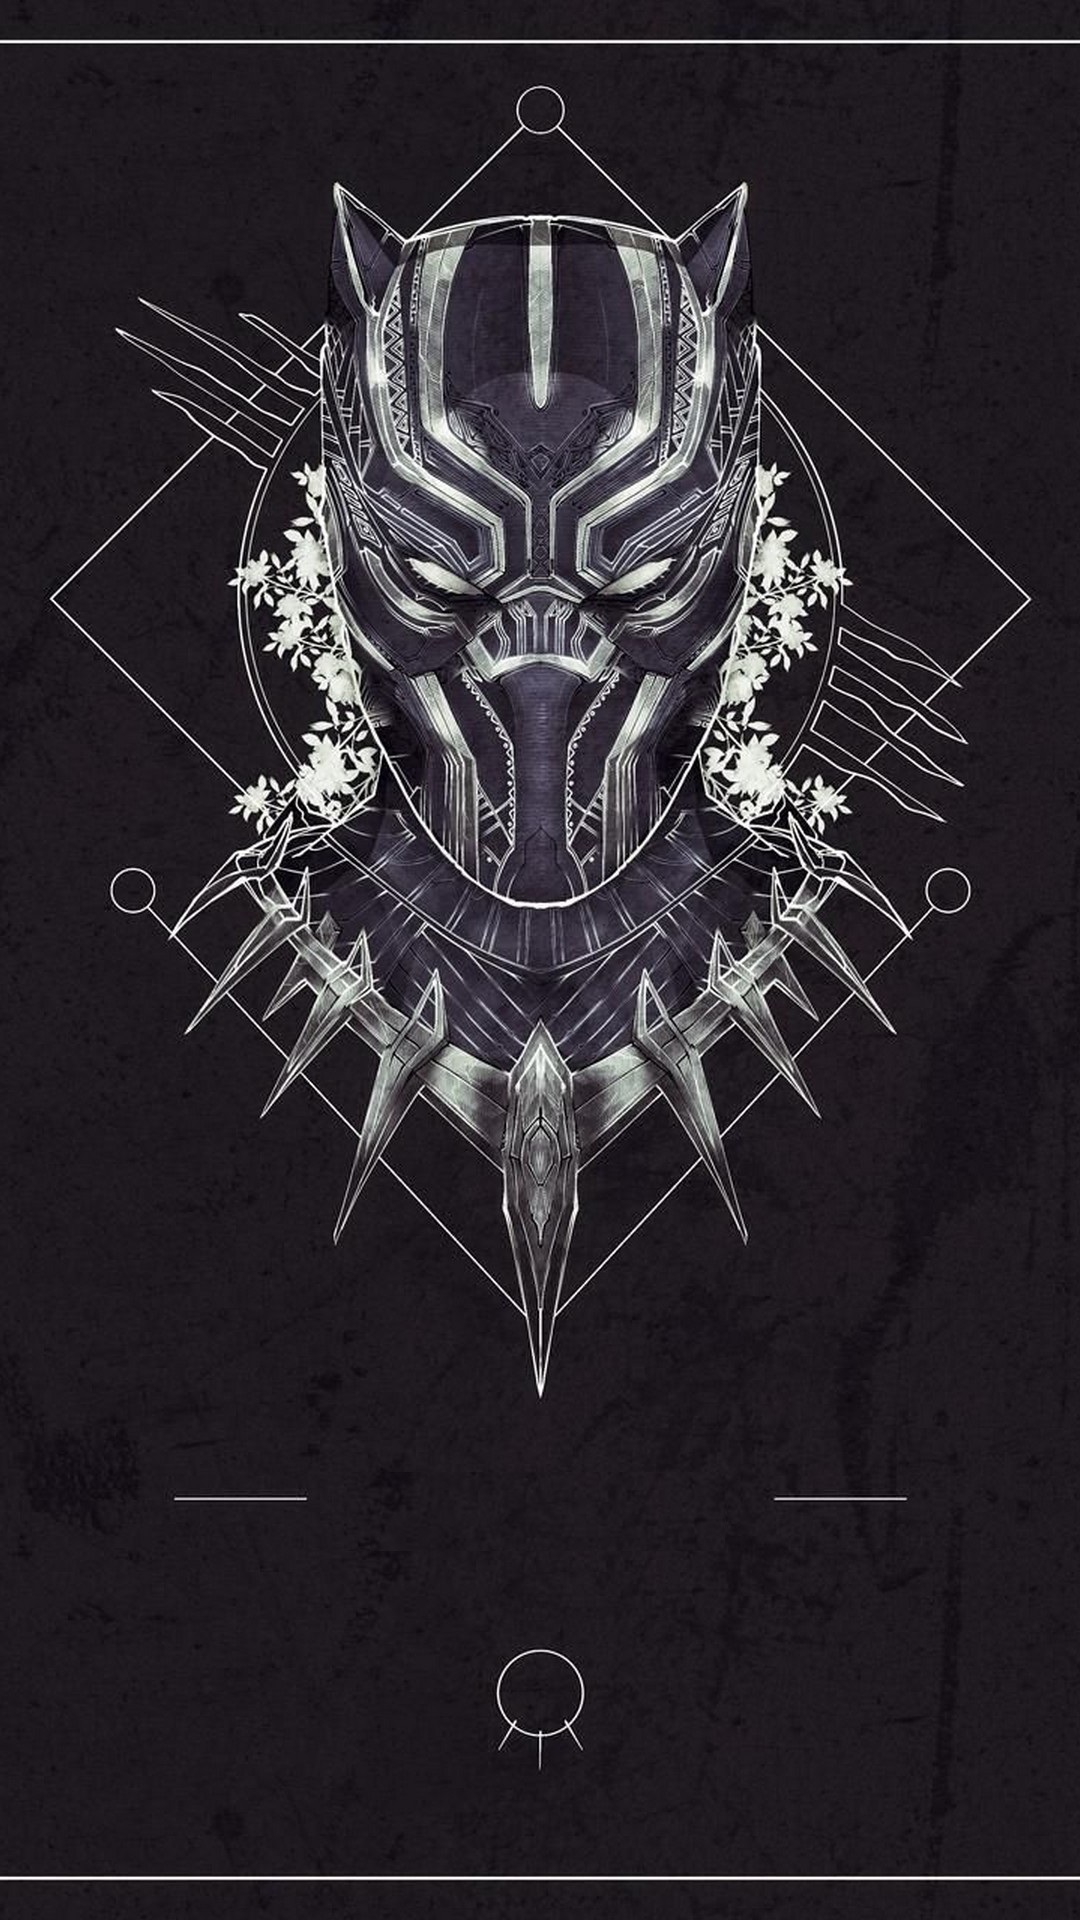 Android Wallpaper Black Panther With high-resolution 1080X1920 pixel. You can use this wallpaper for your Android backgrounds, Tablet, Samsung Screensavers, Mobile Phone Lock Screen and another Smartphones device